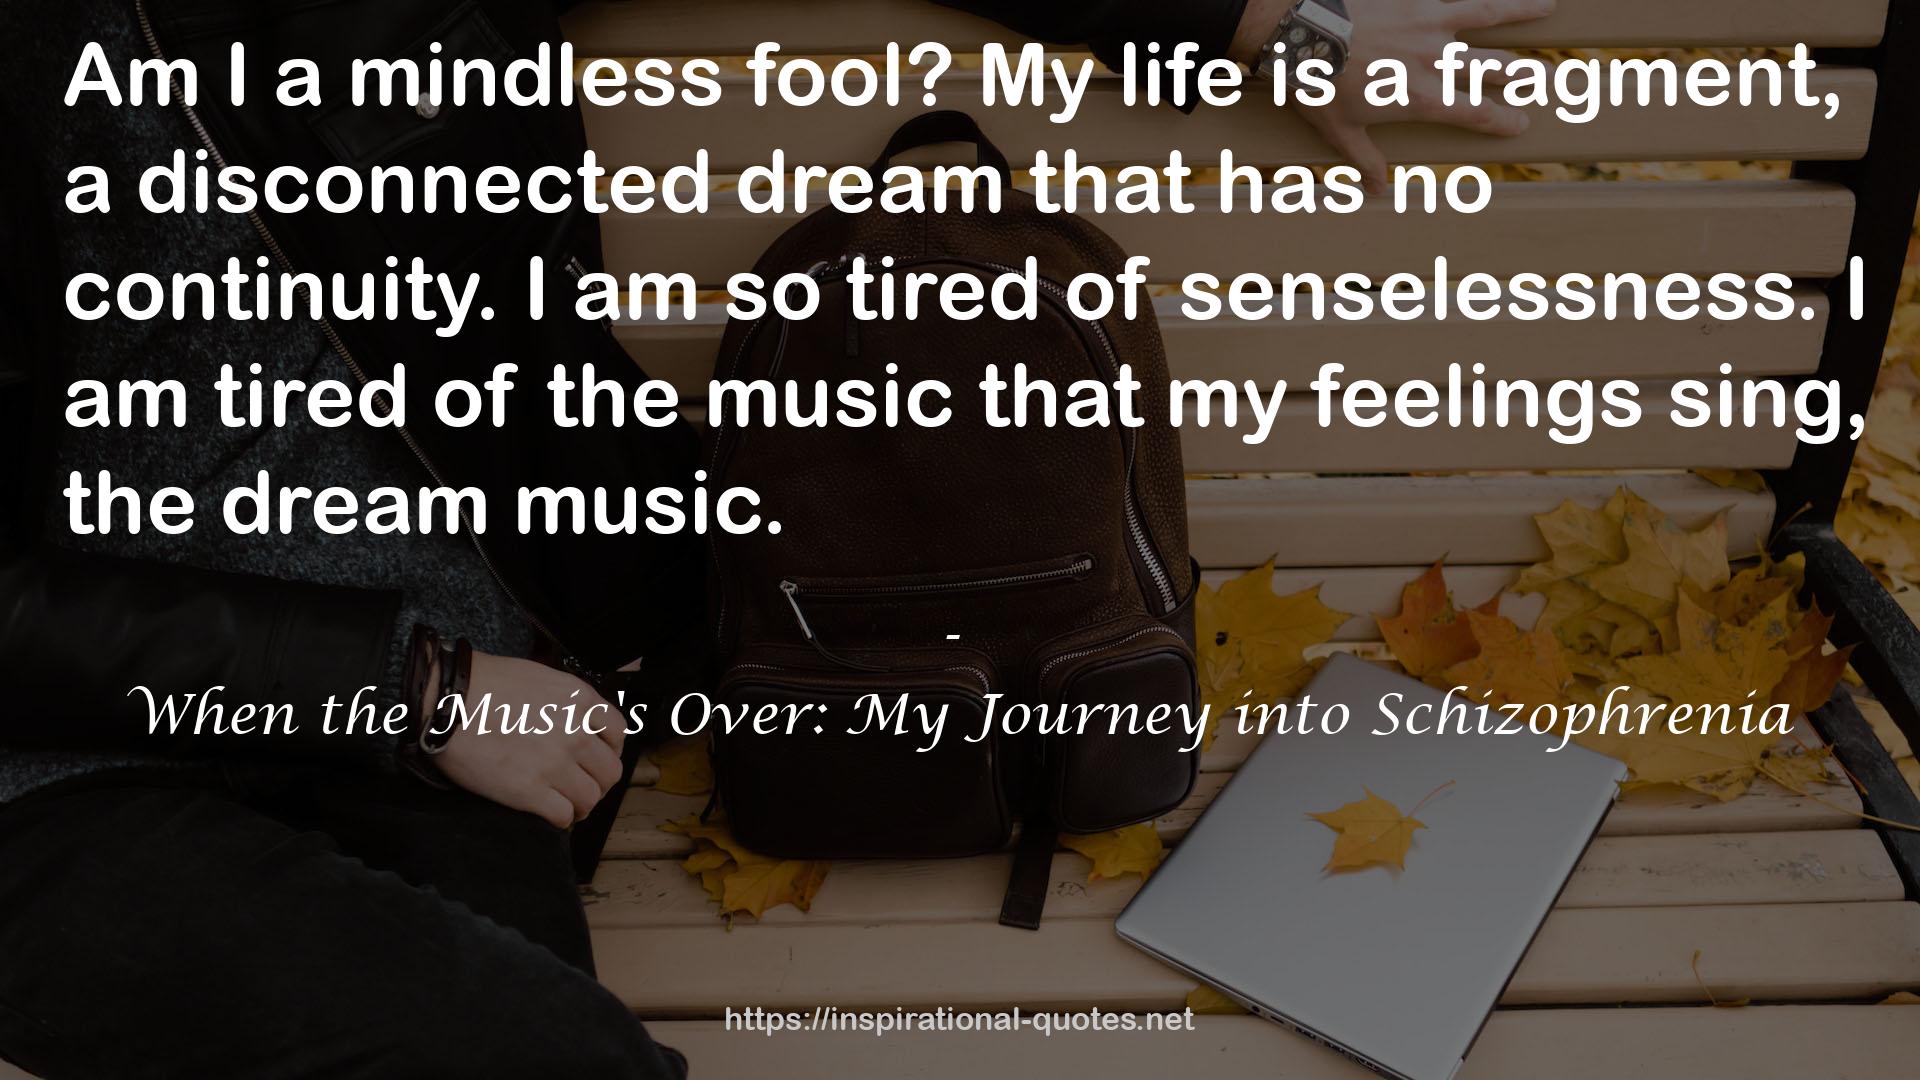 When the Music's Over: My Journey into Schizophrenia QUOTES